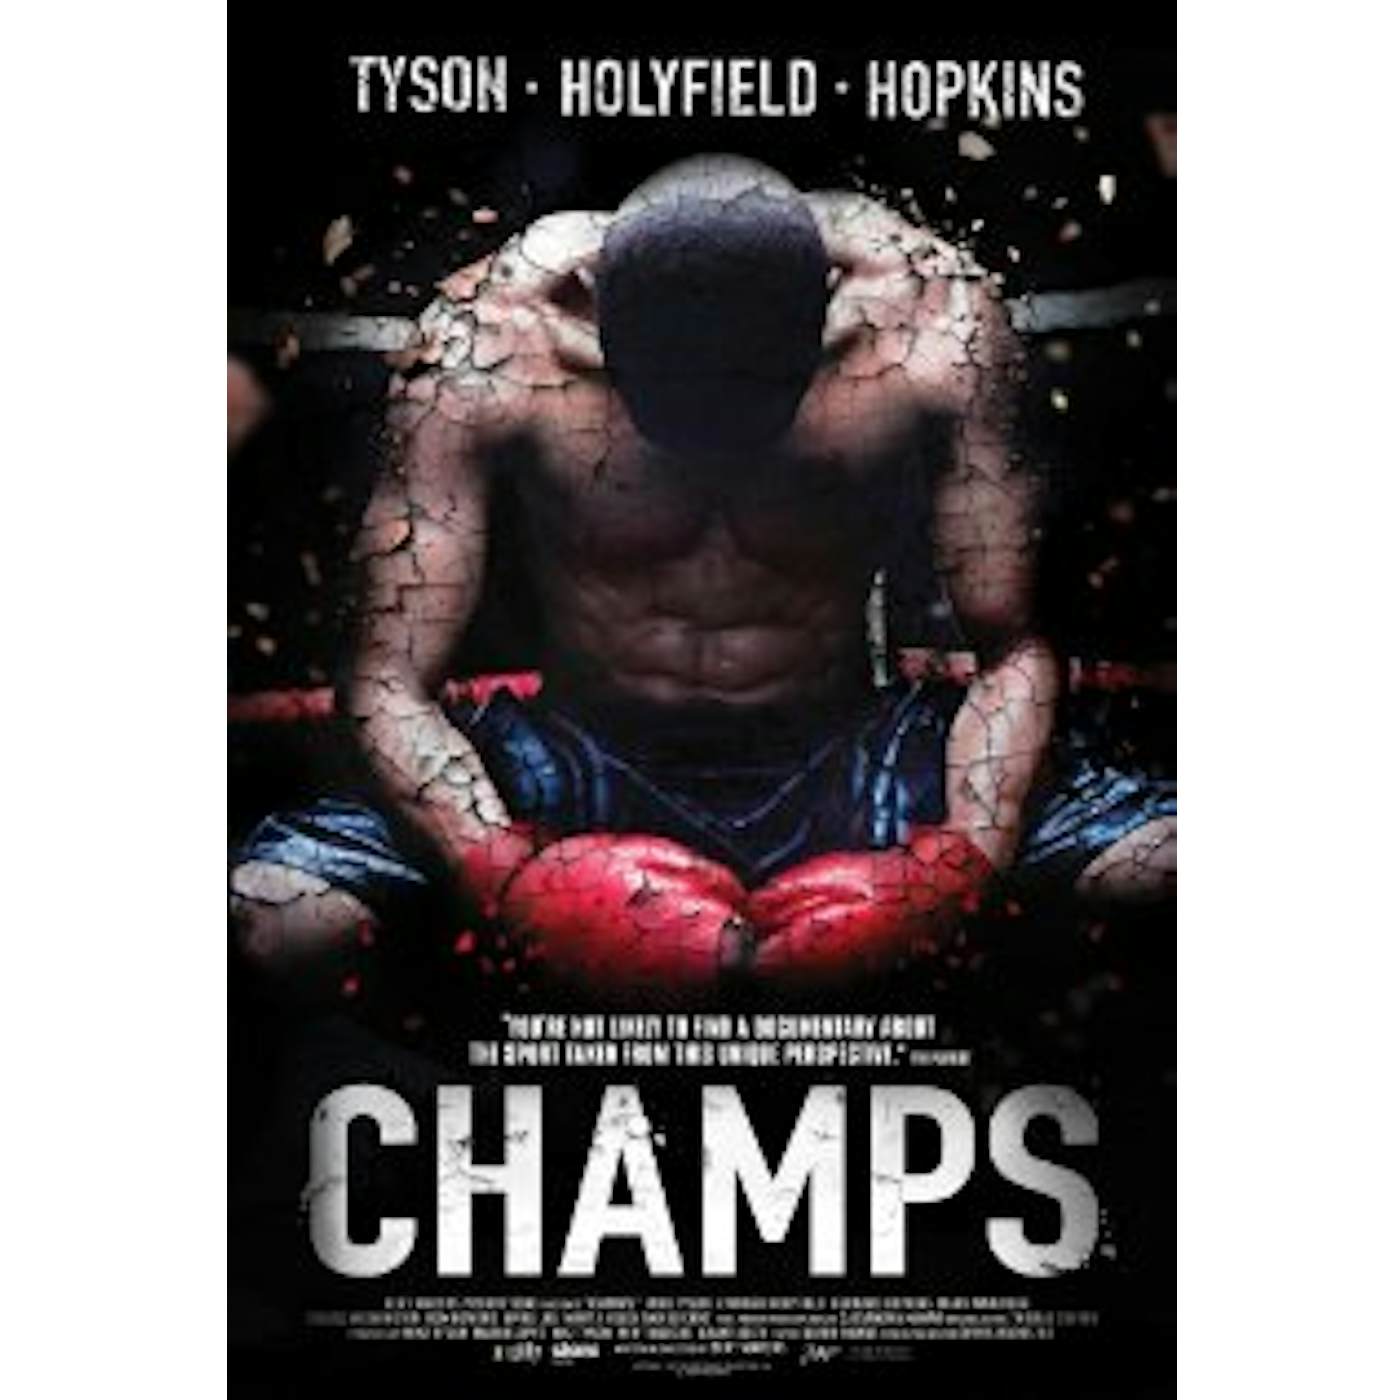 CHAMPS DVD